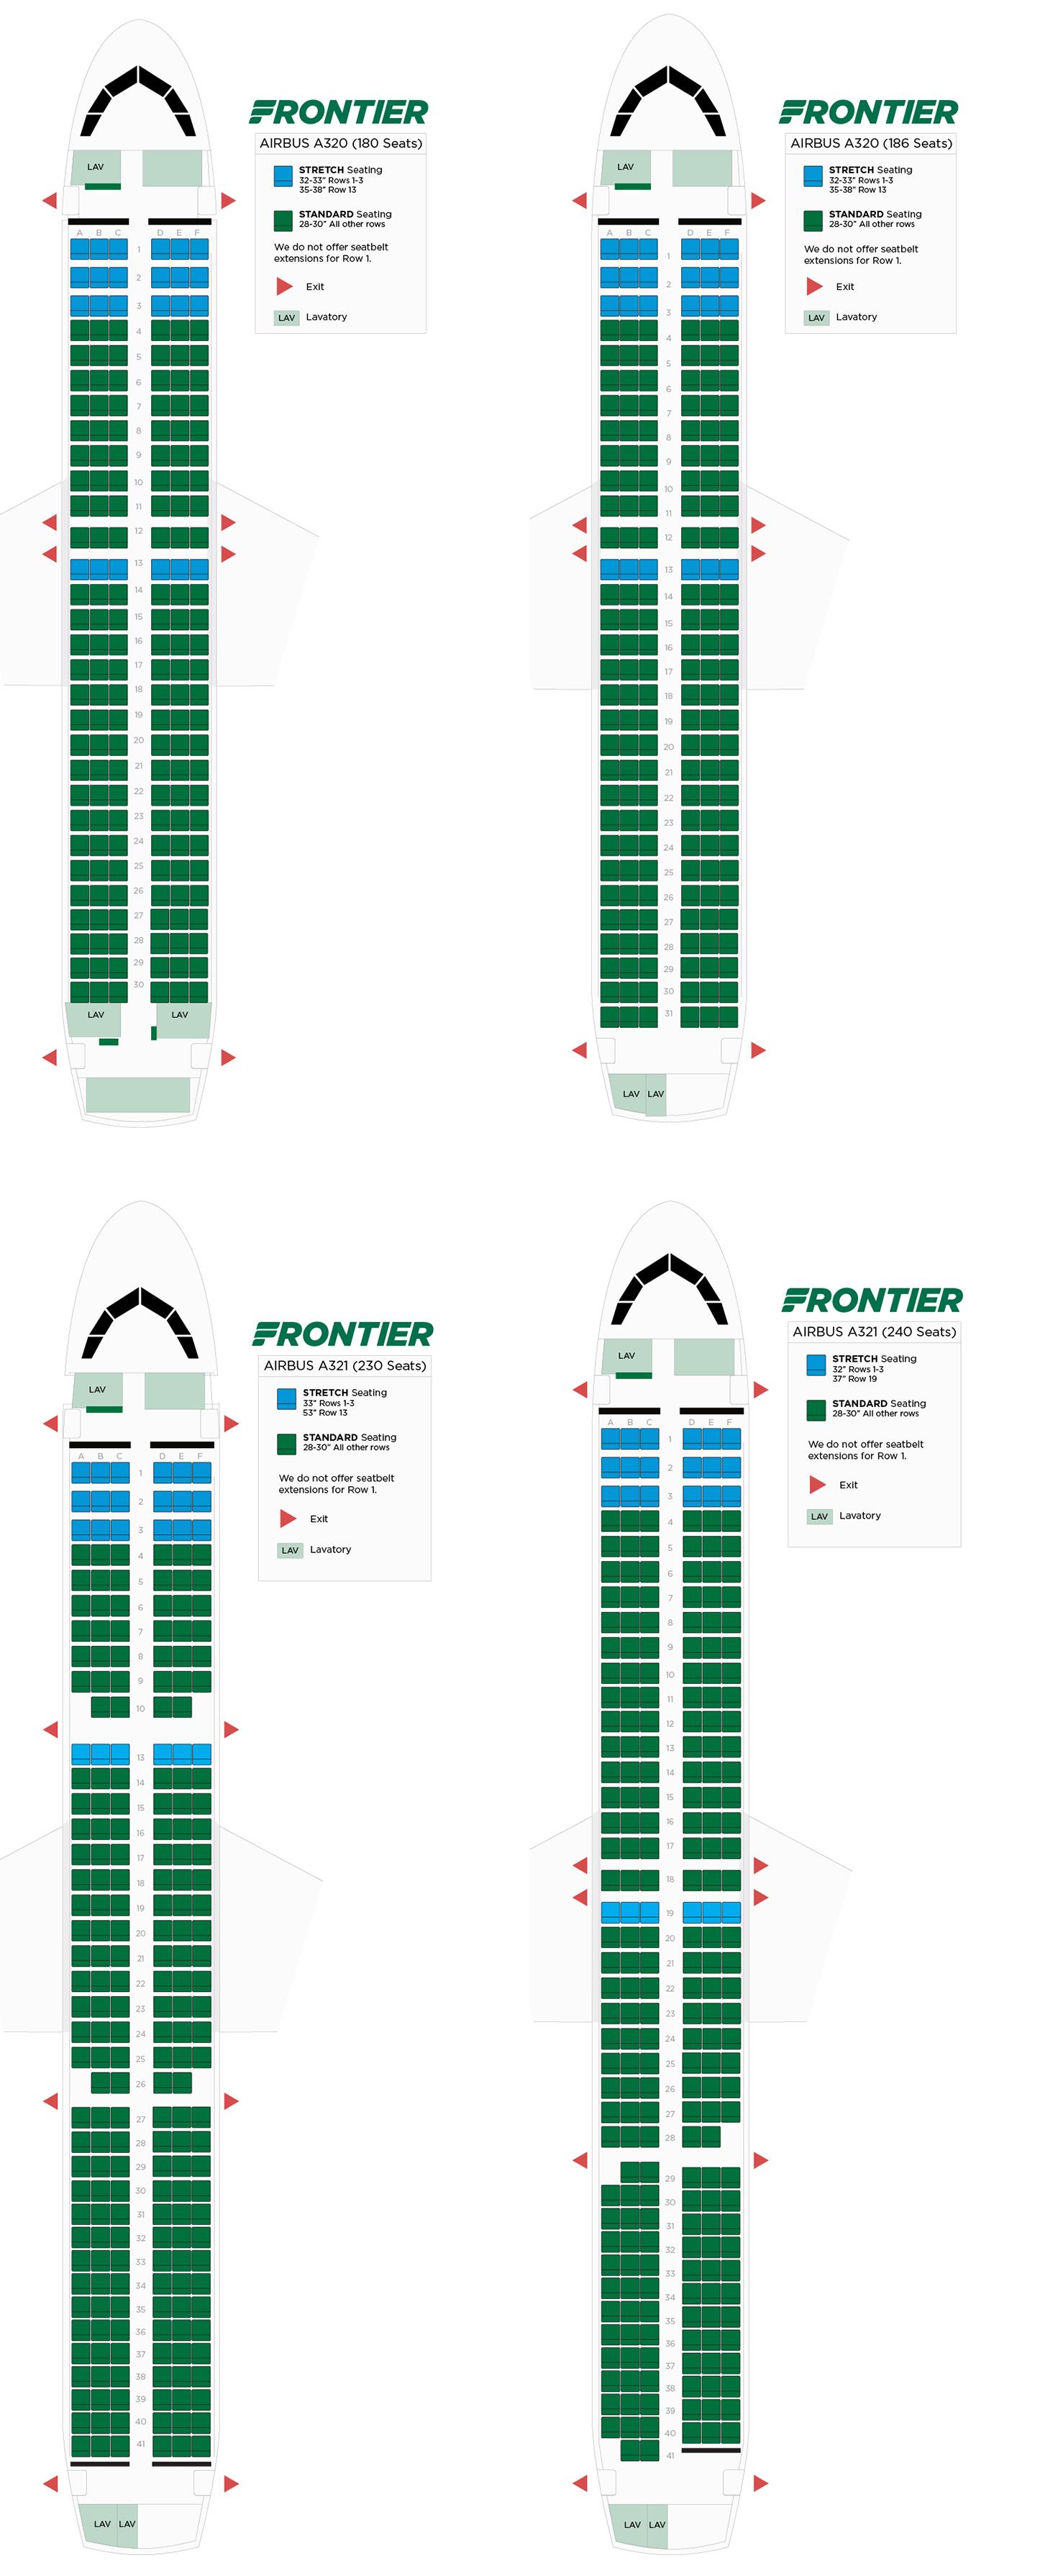 Frontier Plane Seating Chart Our Aircraft | Frontier Airlines